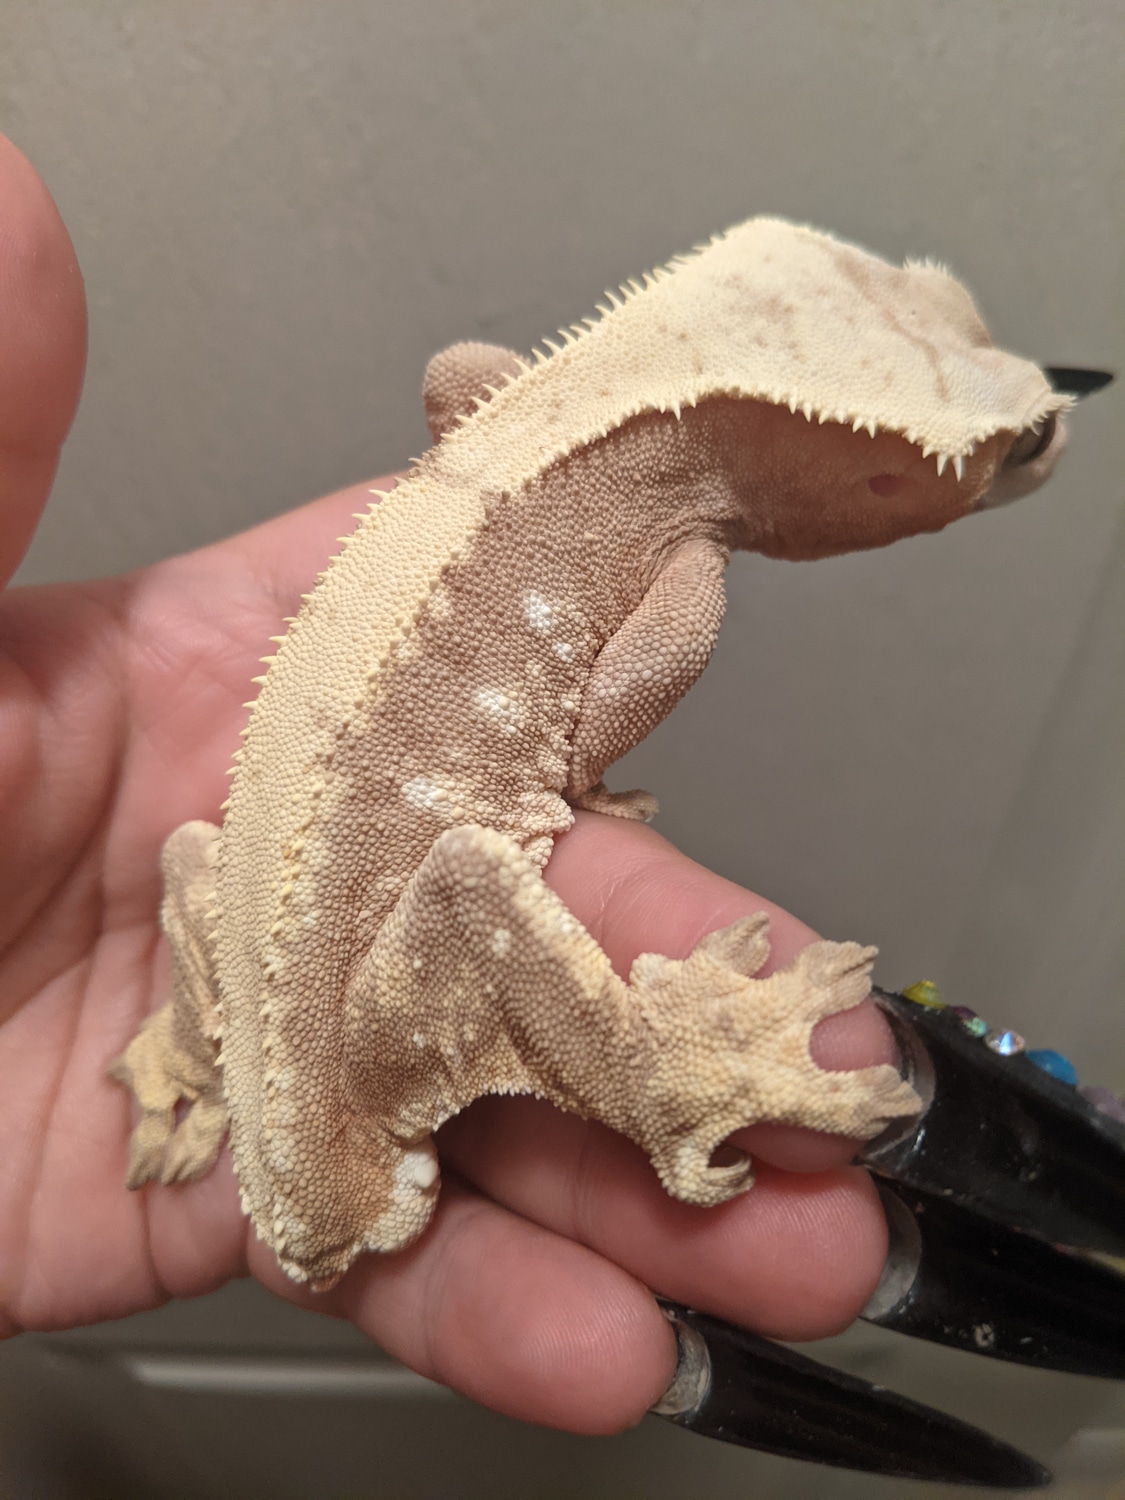 Soft Pink Male Crested Gecko by 𝕲𝖔T𝖍𝖎𝖈𝖈_𝕲𝖊𝖈𝖐os